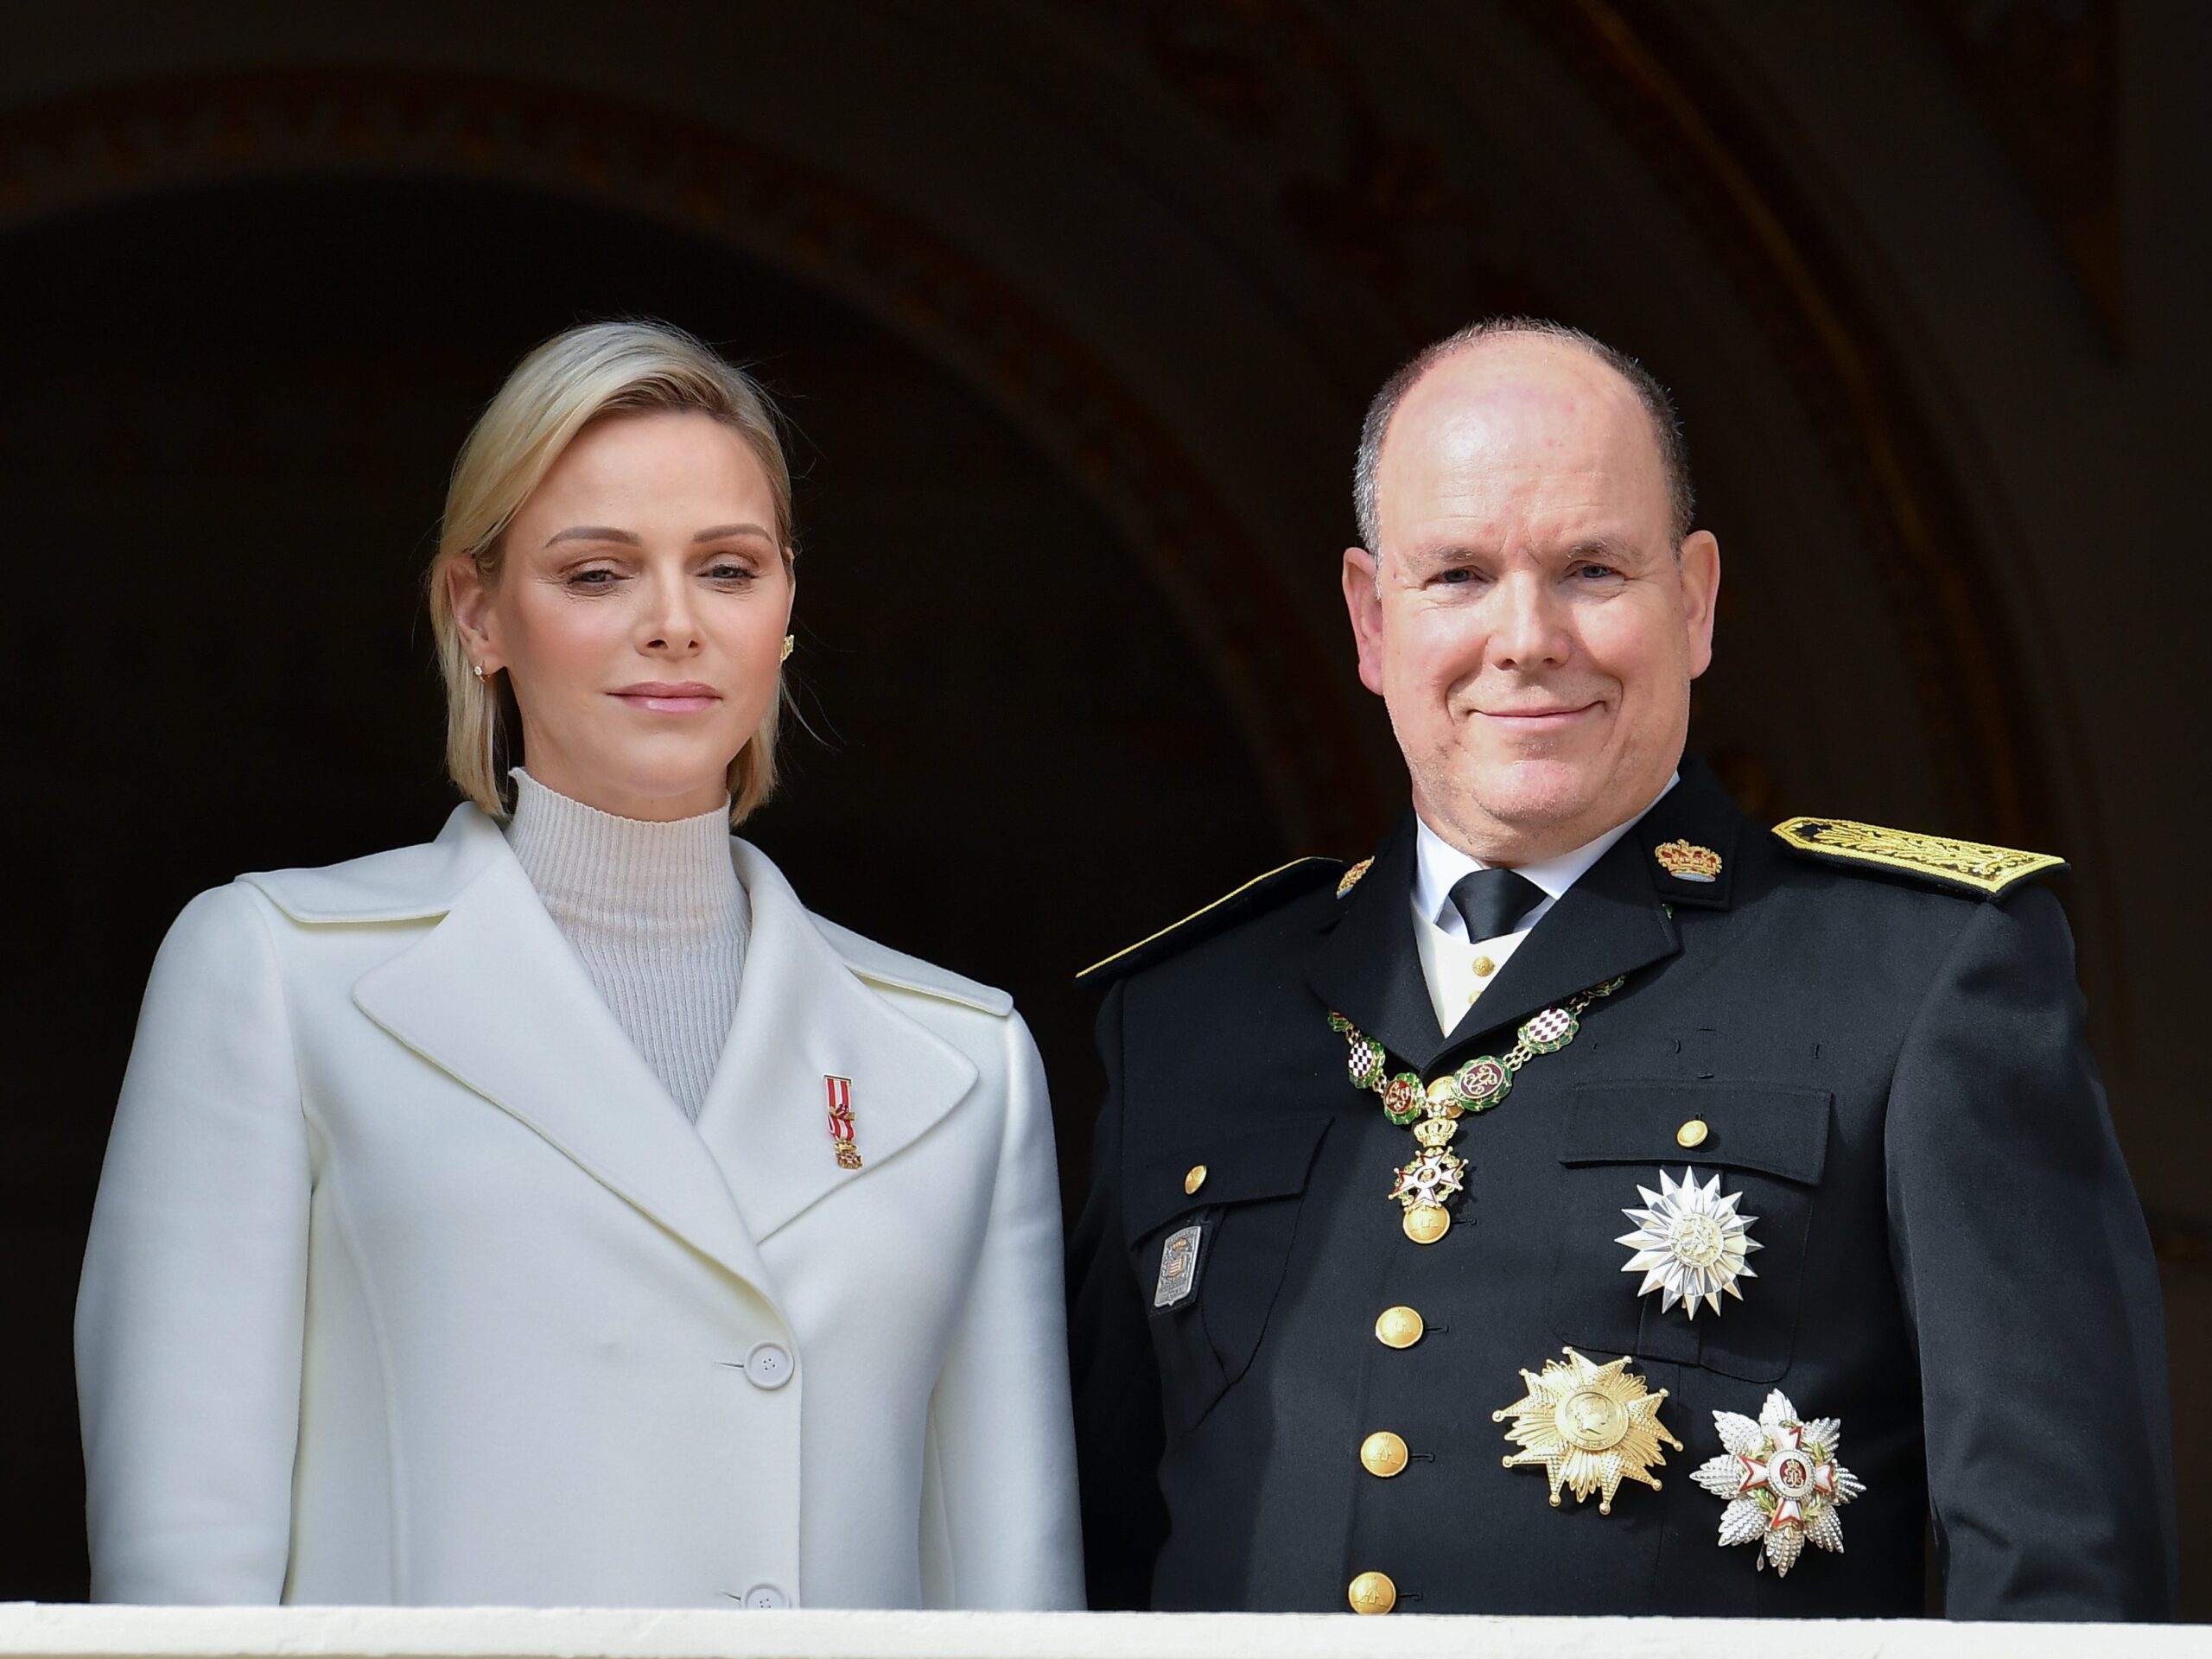 Princess Charlene of Monaco and Prince Albert II of Monaco pose at the Palace balcony during the Monaco National Day Celebrations on November 19, 2019 in Monte-Carlo, Monaco